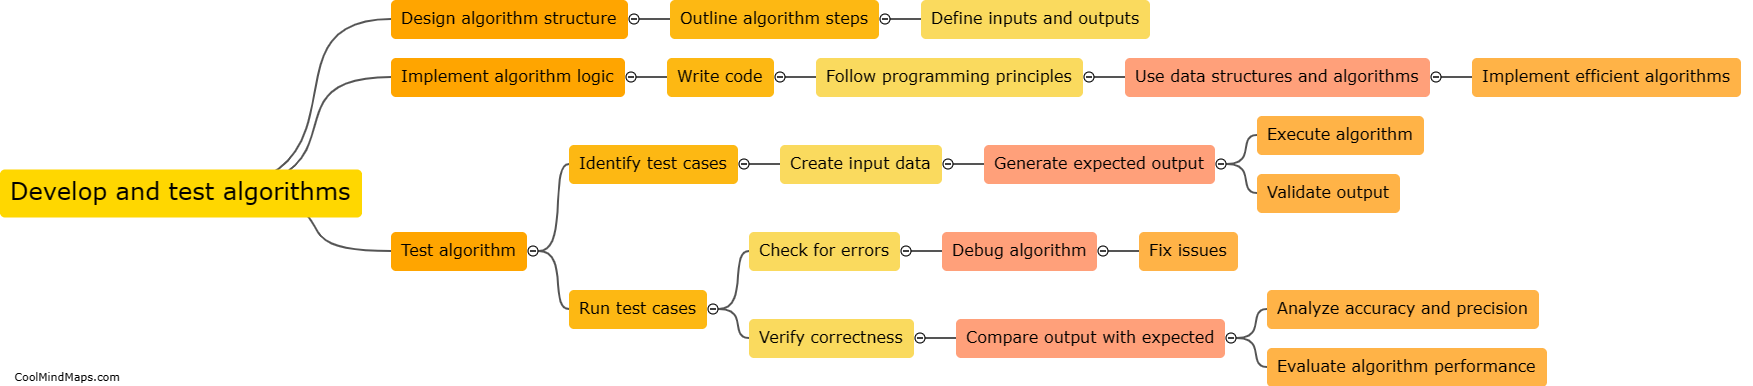 How are algorithms developed and tested?